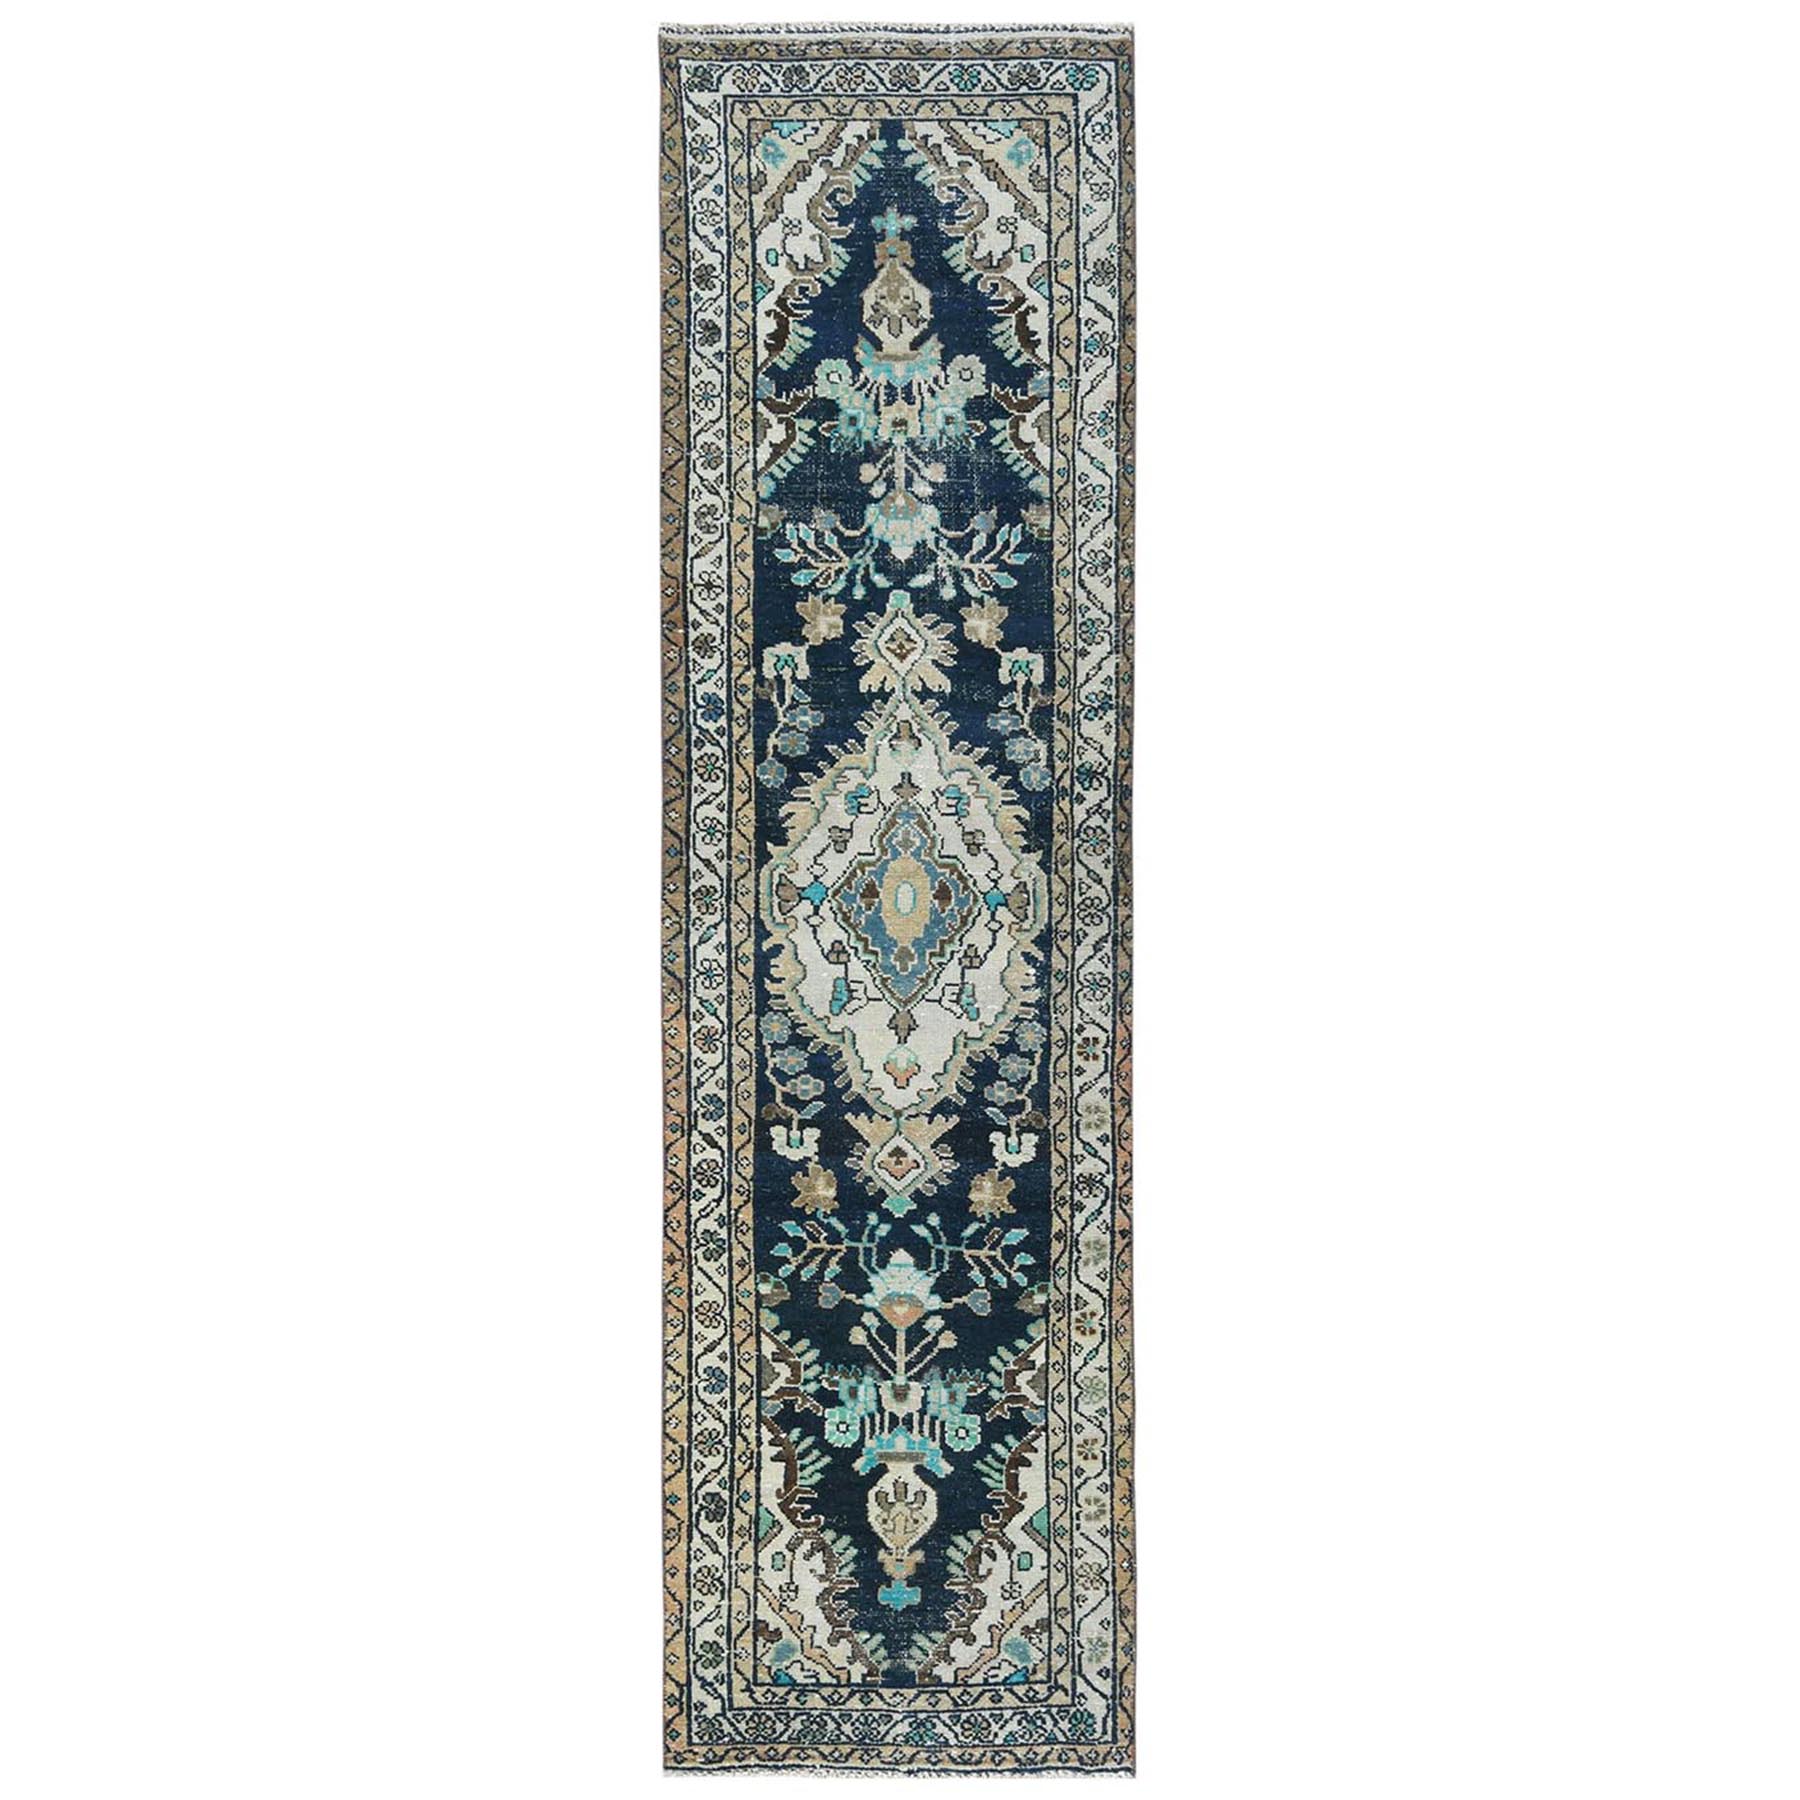 2'6"x9'9" Midnight Blue, Vintage Persian Hamadan with Large Medallion Design, Hand Woven, Distressed Look, Sheared Low, Pure Wool Runner Oriental Rug 